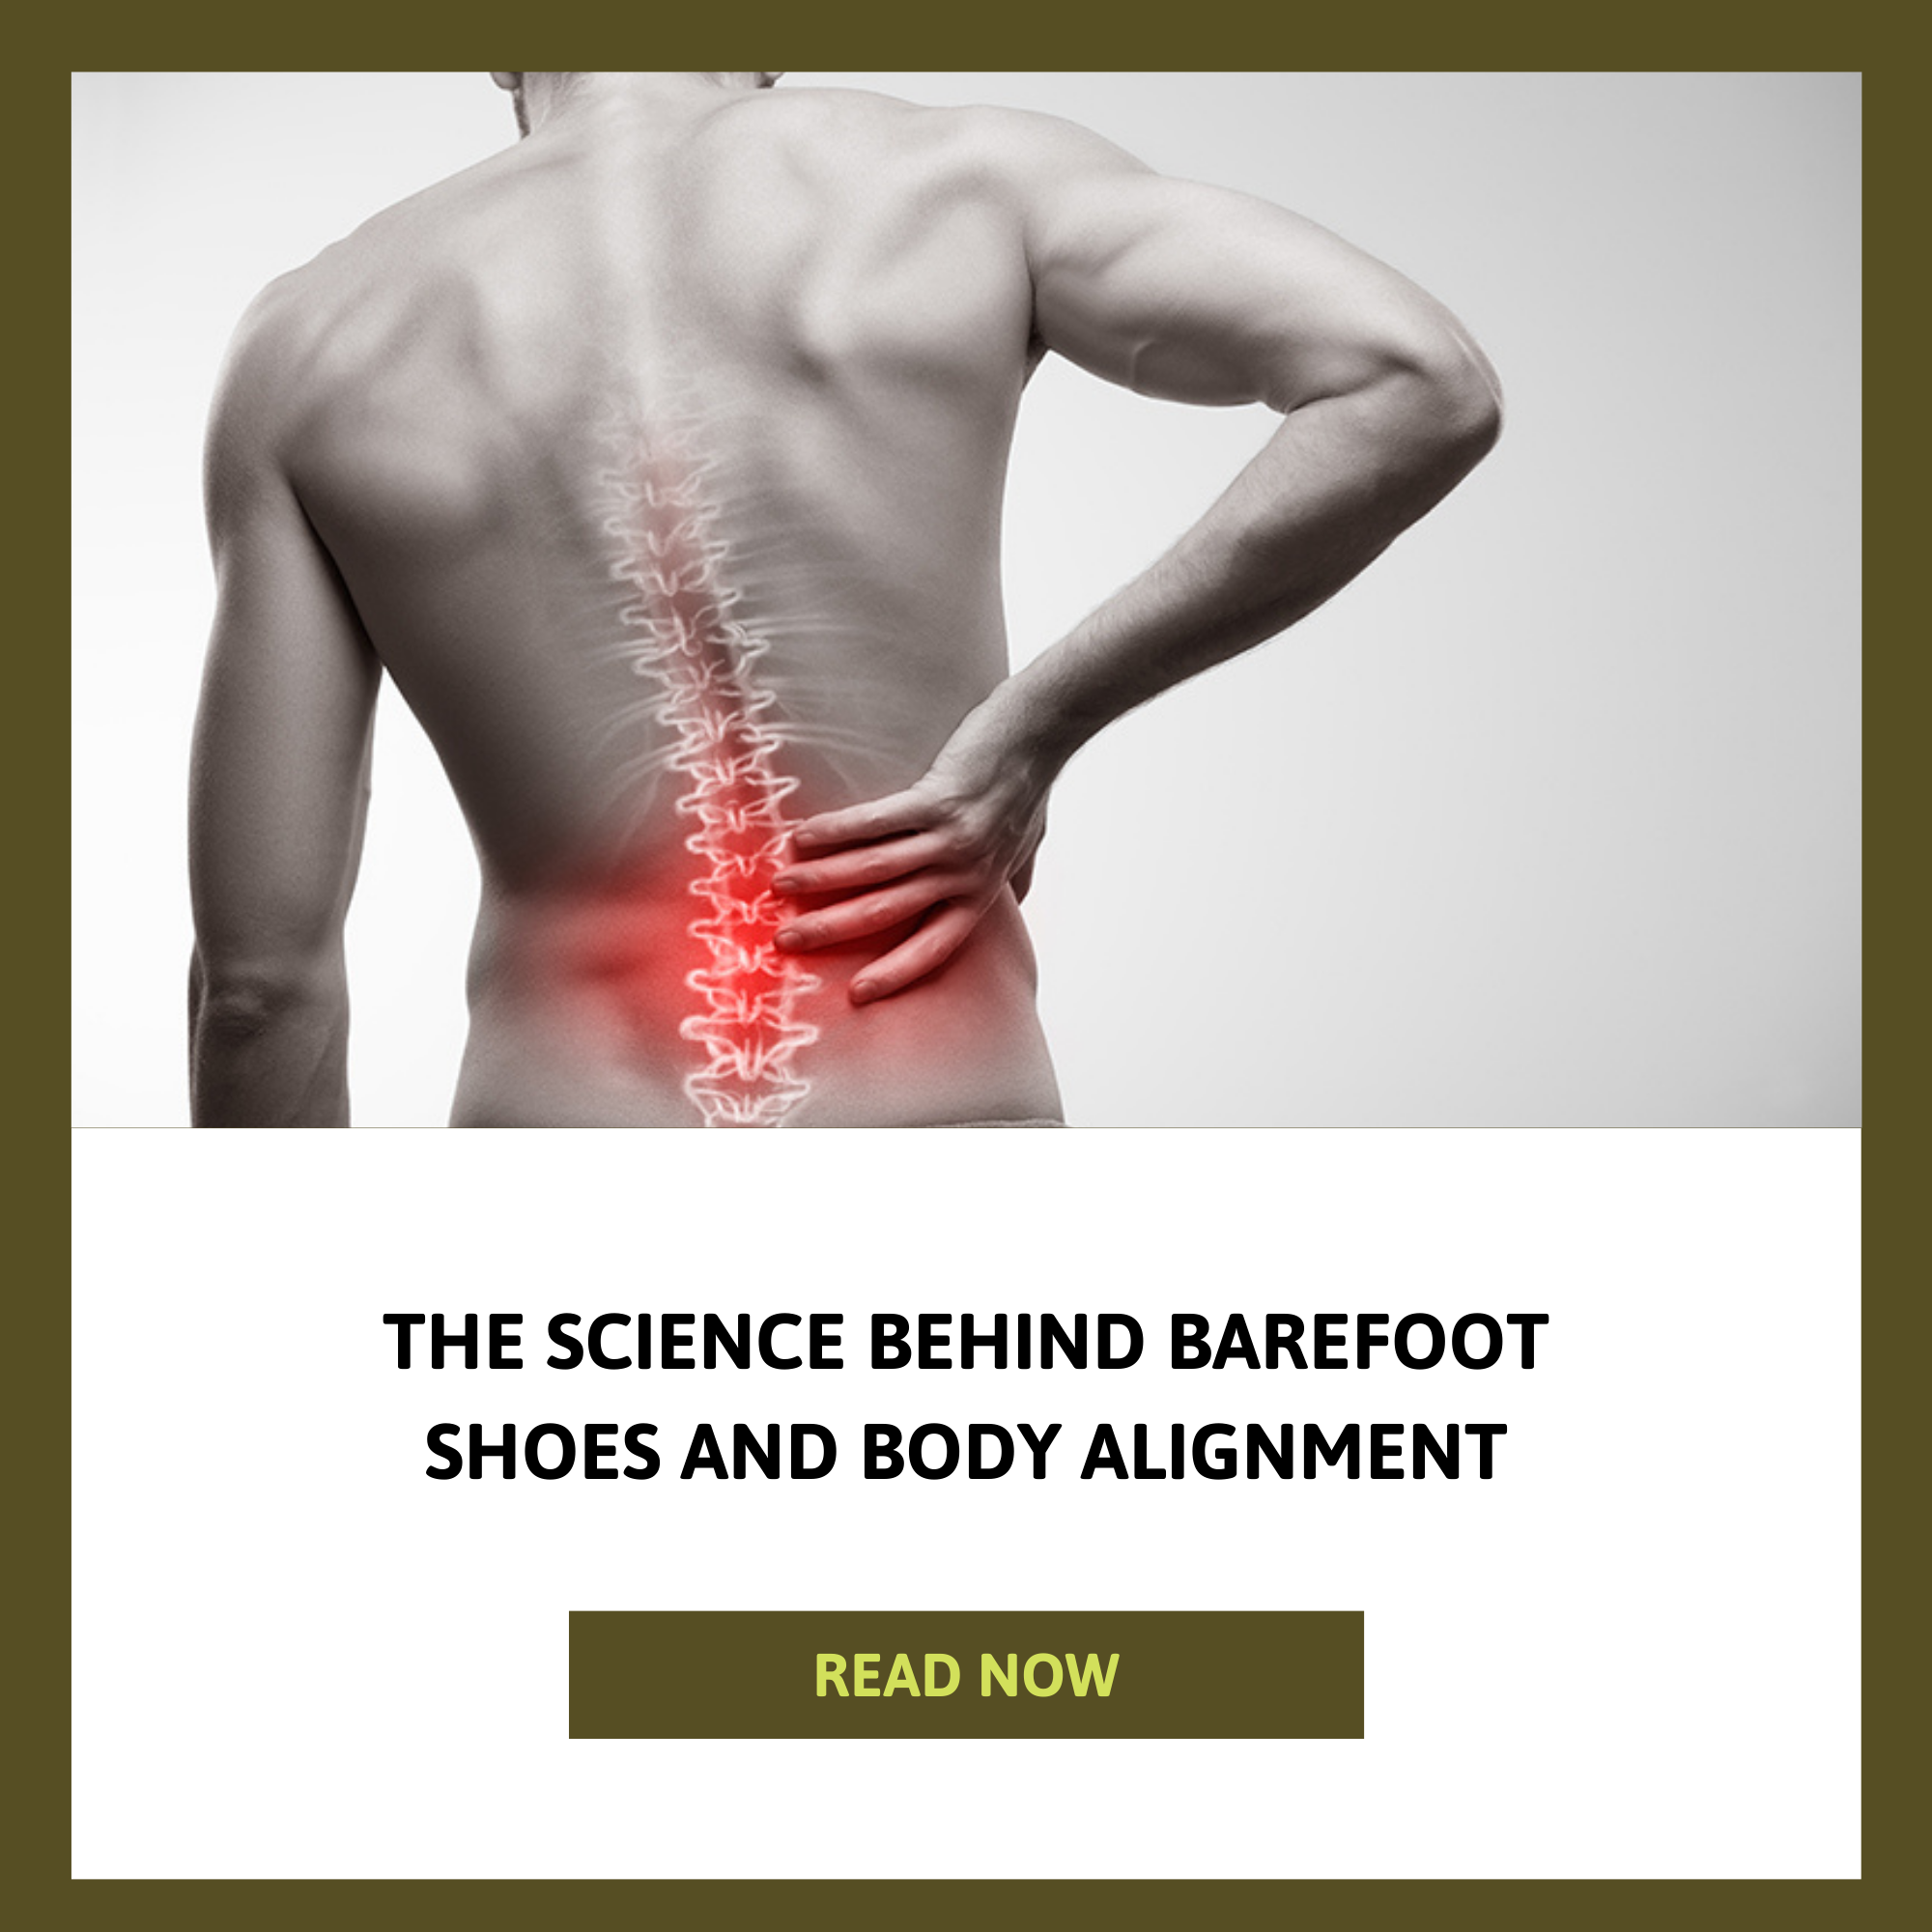 The Science Behind Barefoot Shoes and Body Alignment